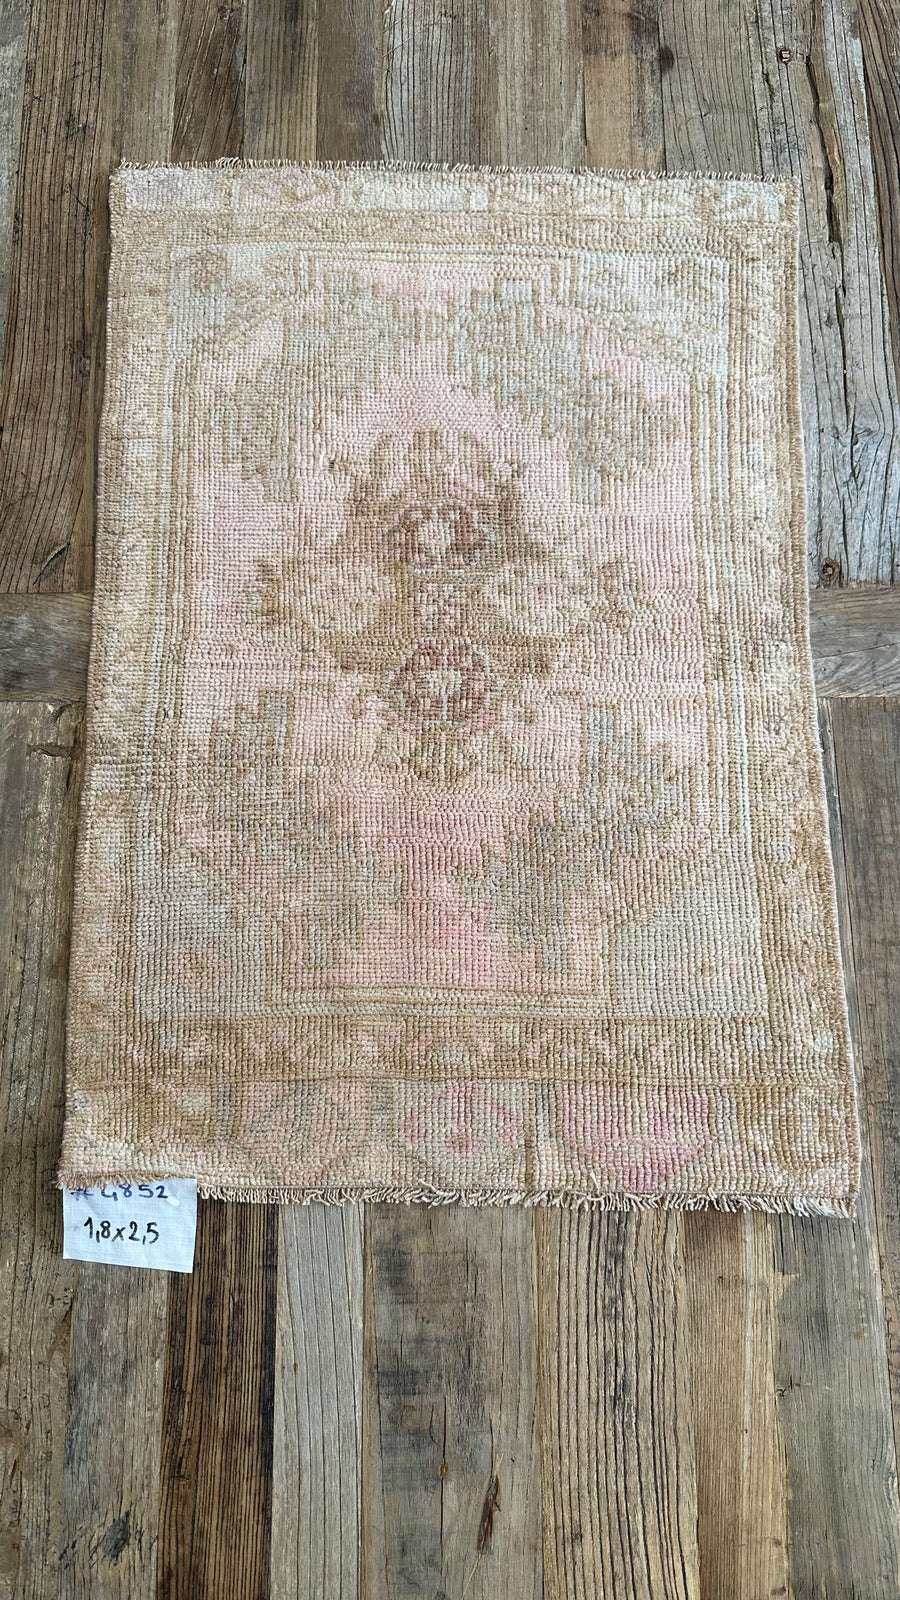 1’8 x 2’5 Antique Turkish Oushak Rug Muted Gray, Camel Beige & Pale Pink